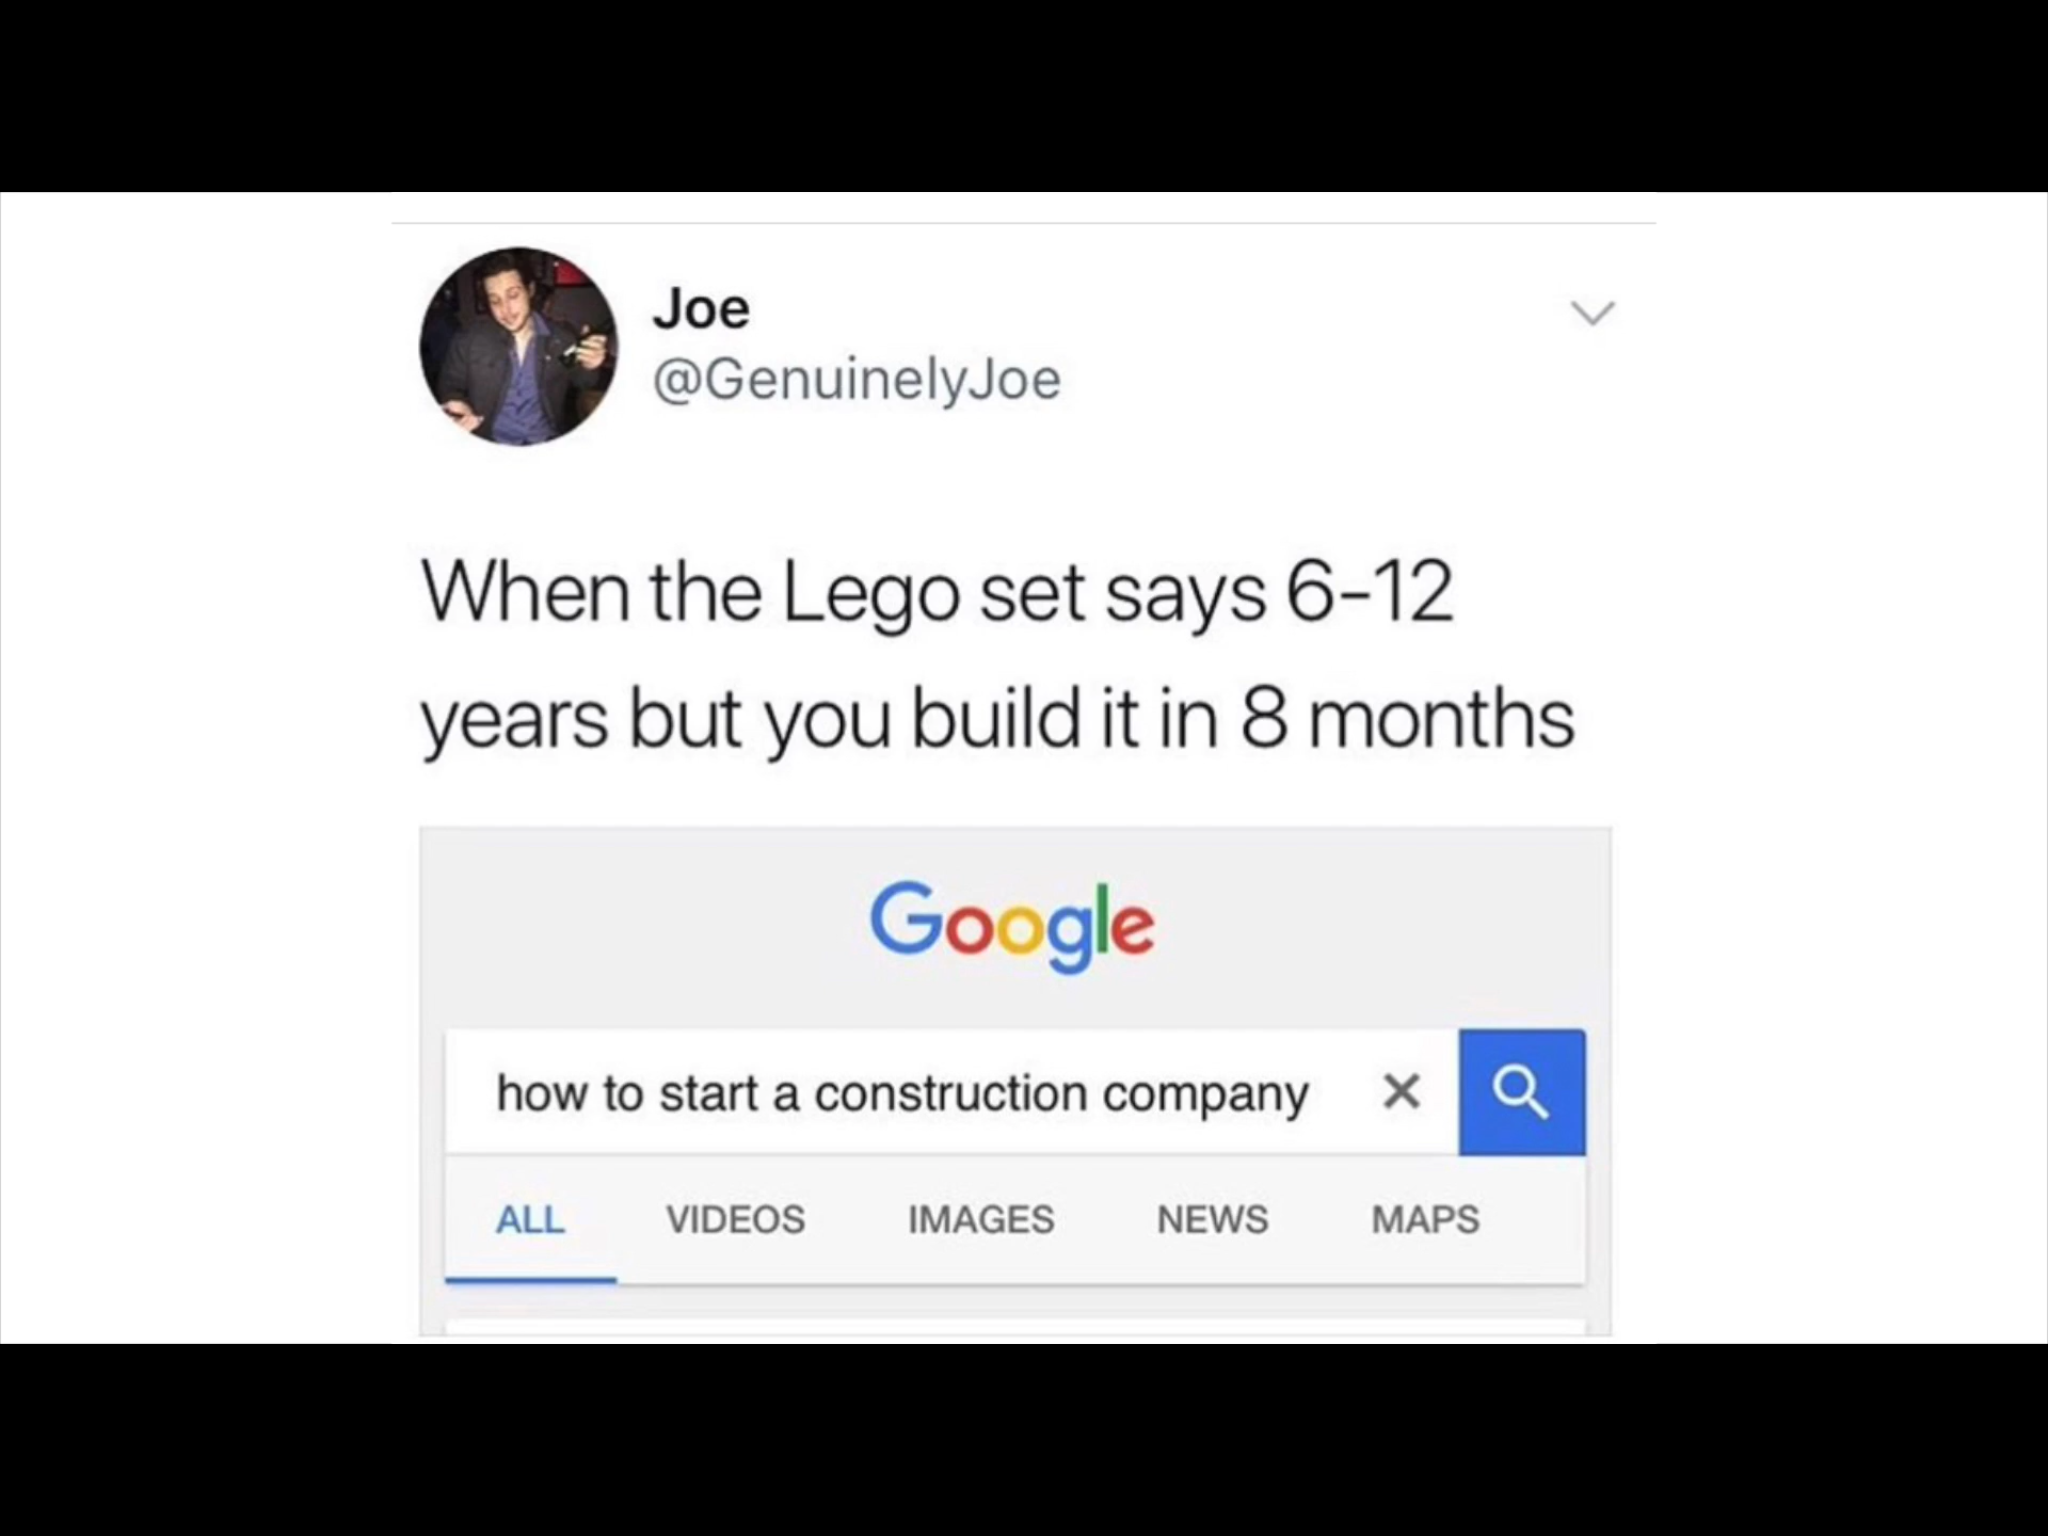 meme stream - multimedia - Joe When the Lego set says 612 years but you build it in 8 months Google how to start a construction company a All Videos Images News Maps